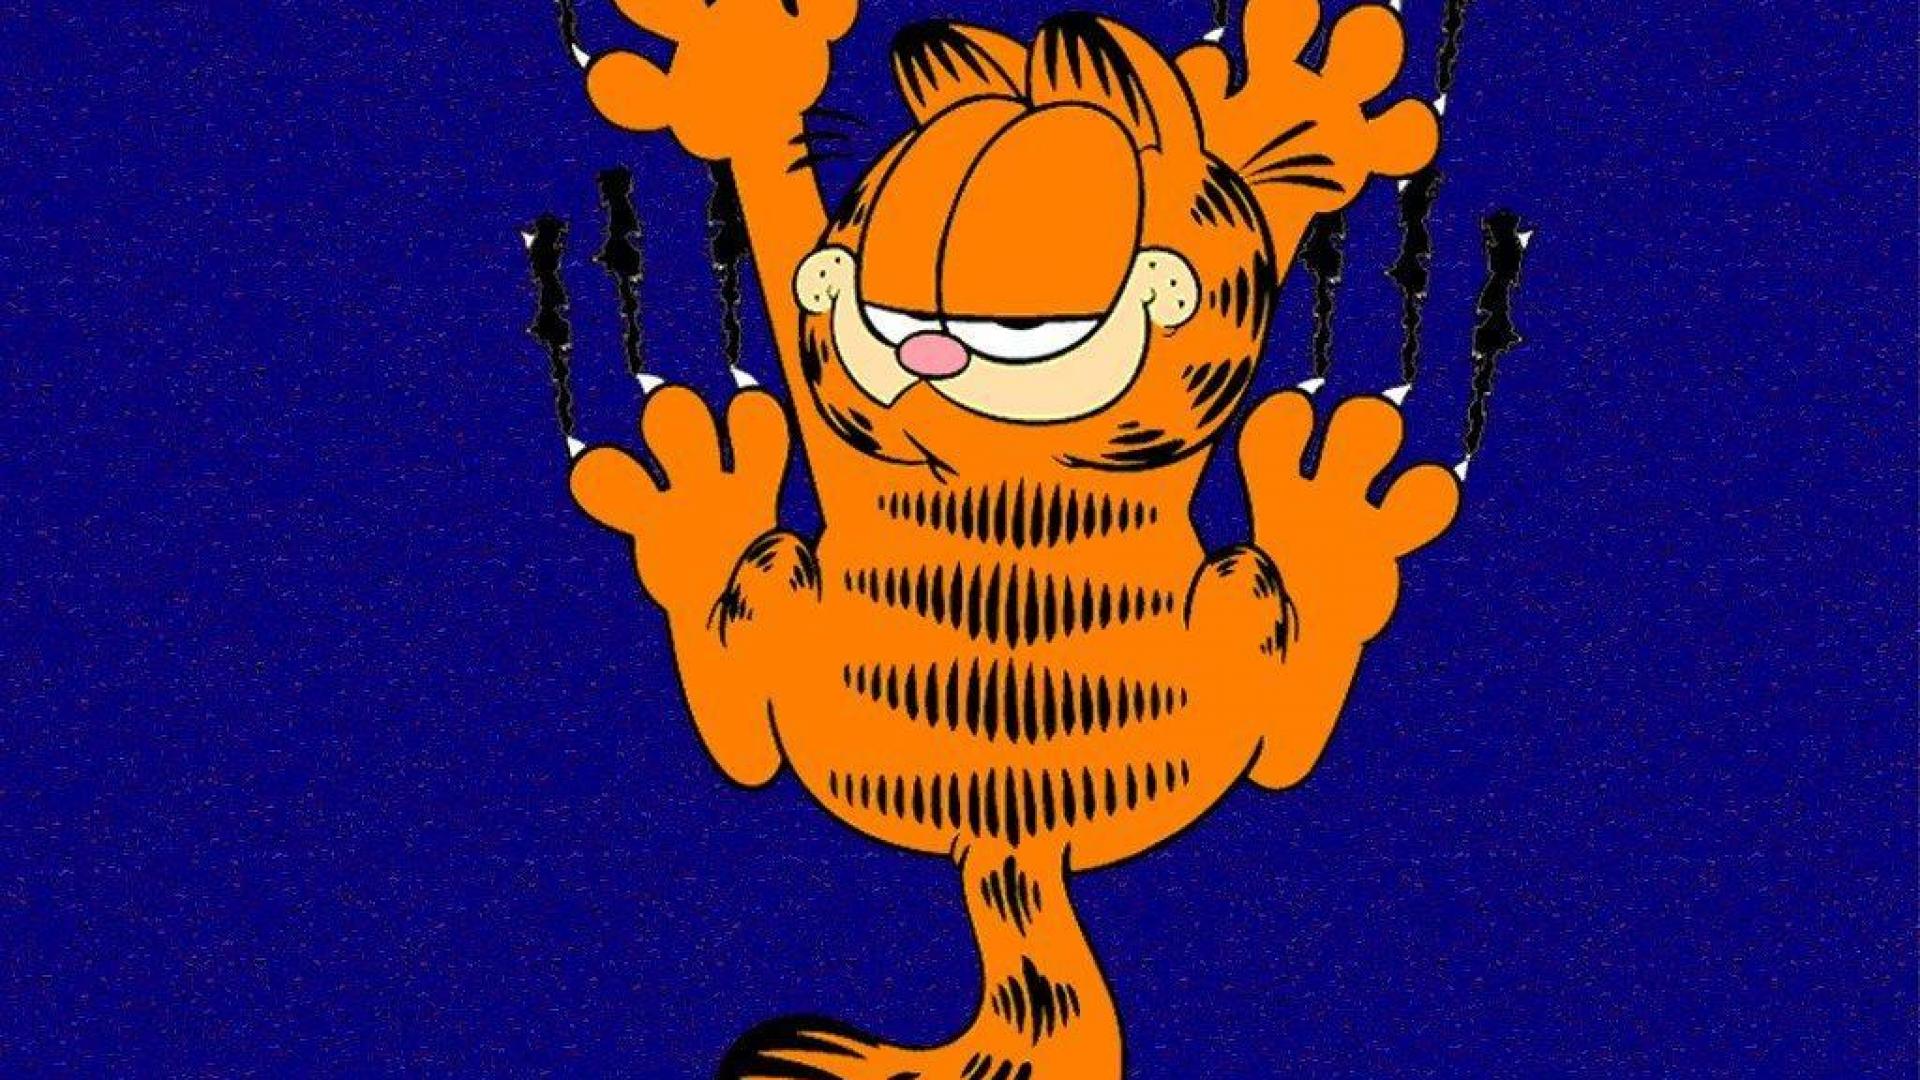 Garfield 4K wallpapers for your desktop or mobile screen free and easy to  download